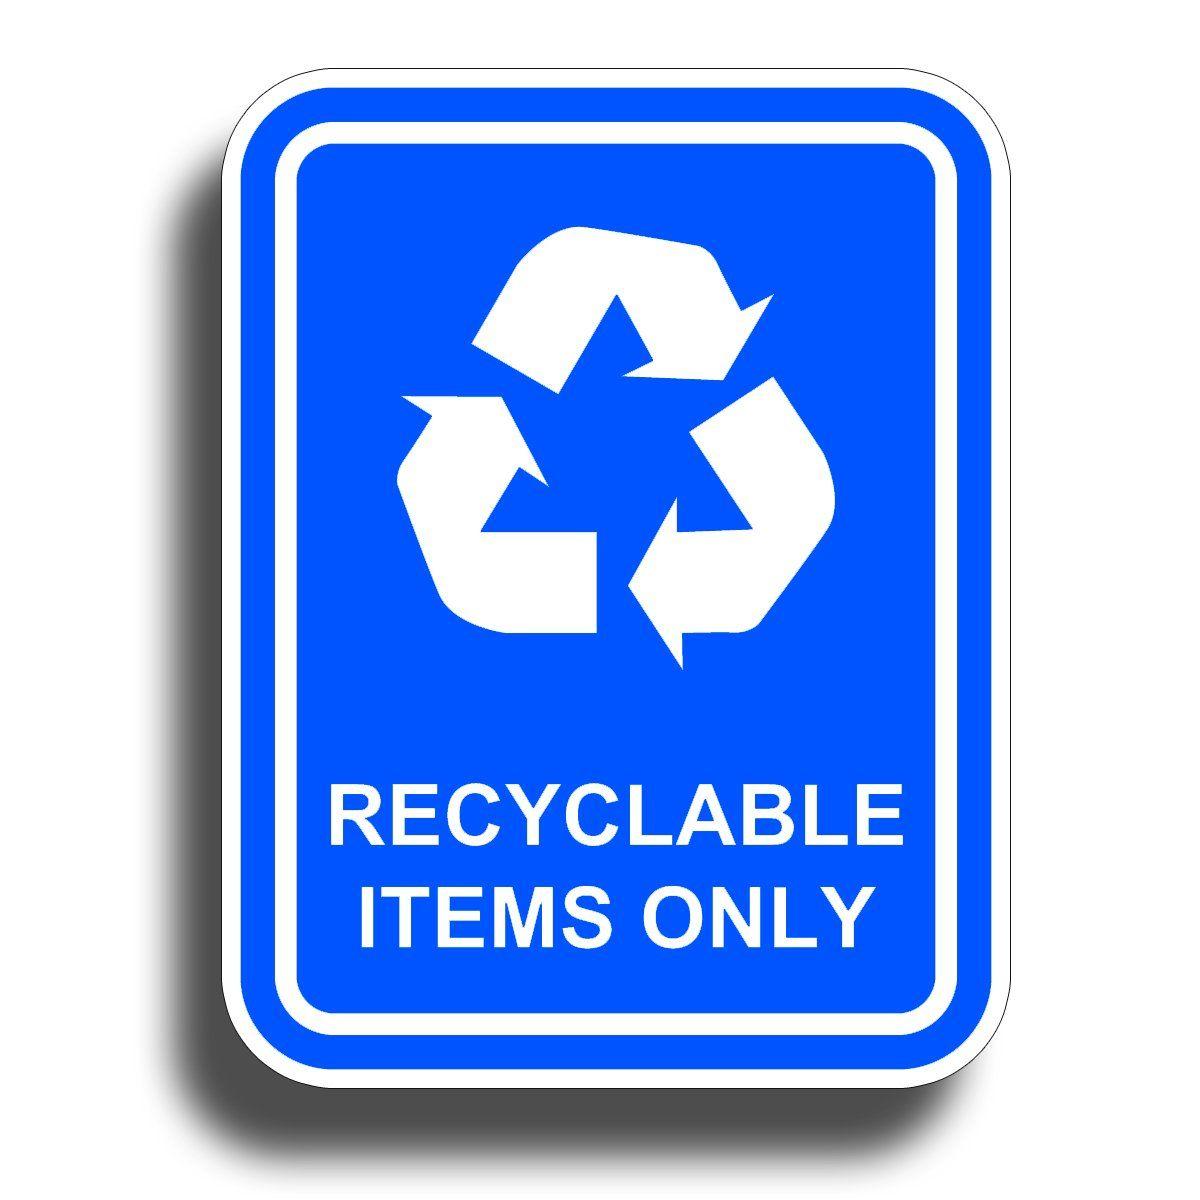 Blue Recycle Logo - Amazon.com : Recycling Items Only Sticker Vinyl Die Cut Recycling